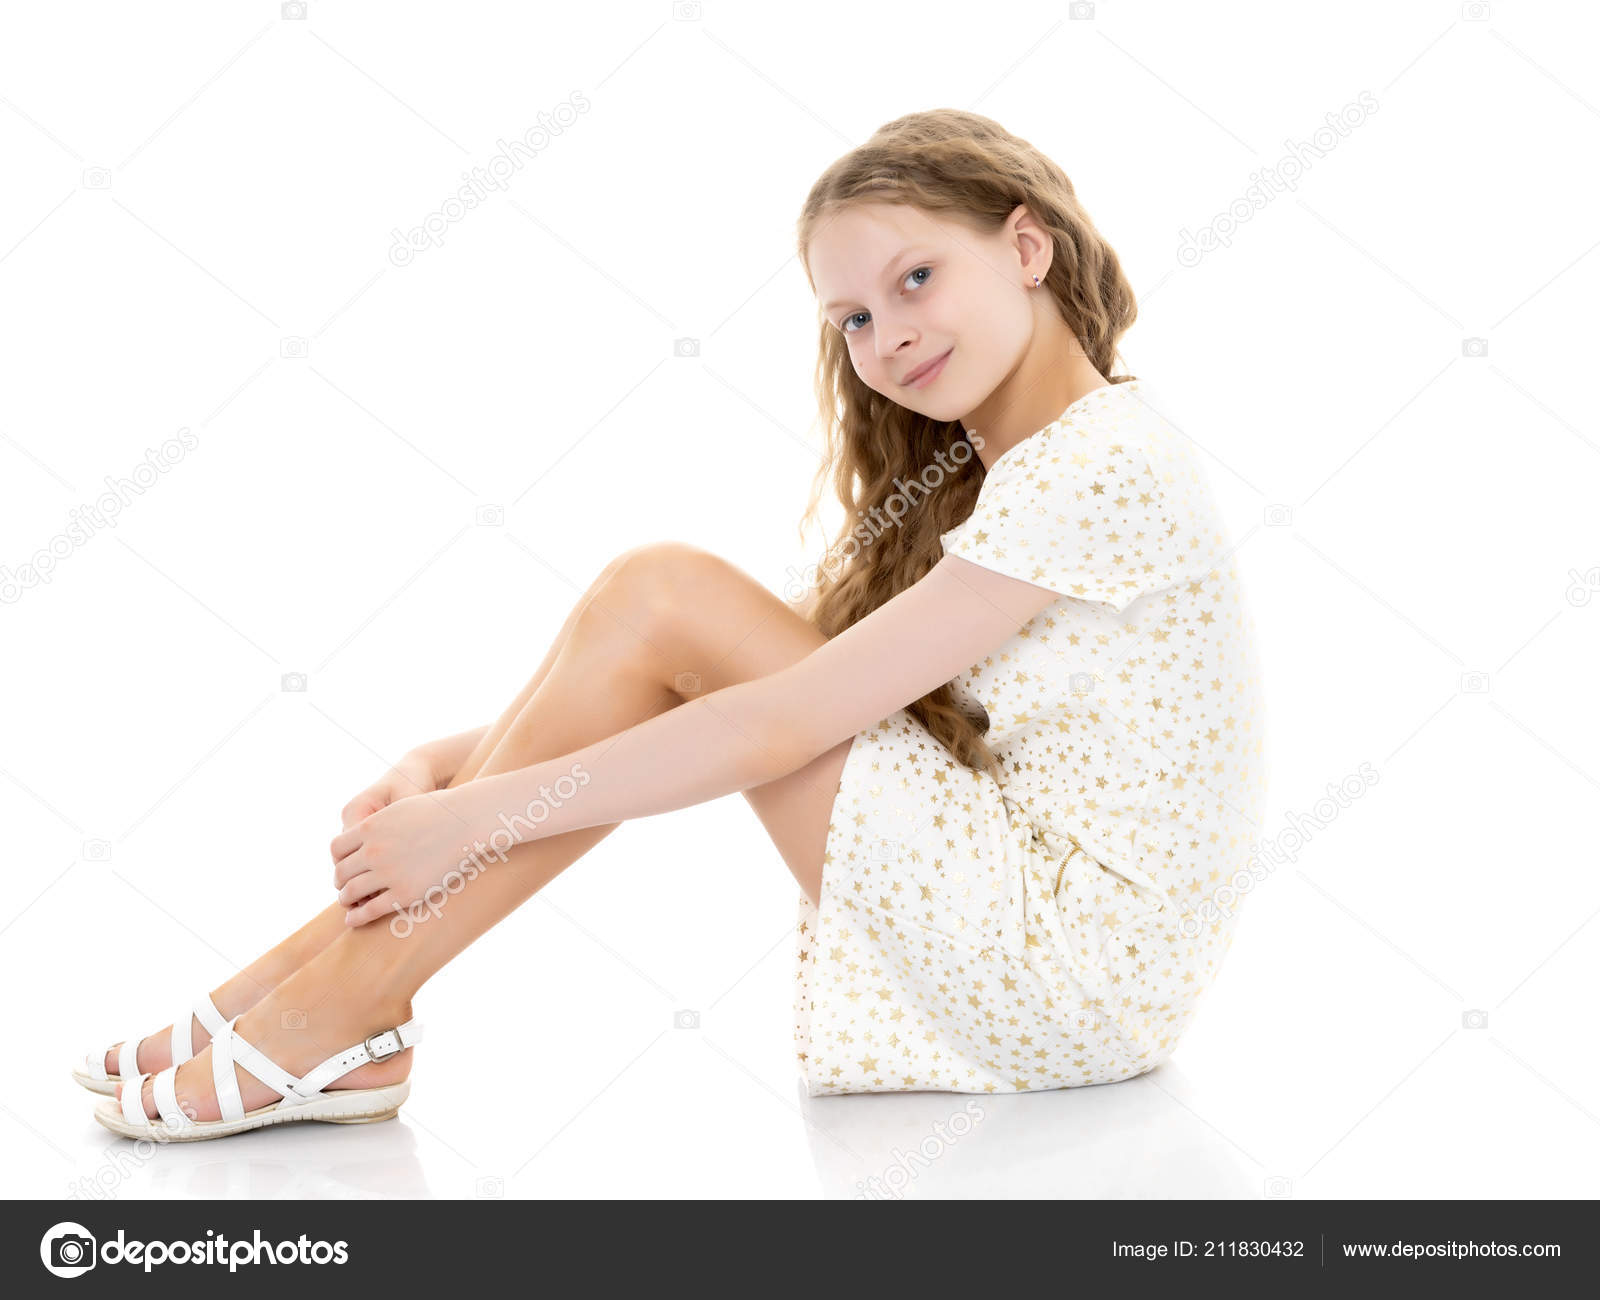 Download - A teenage girl in a short dress sits on the floor and holds ...